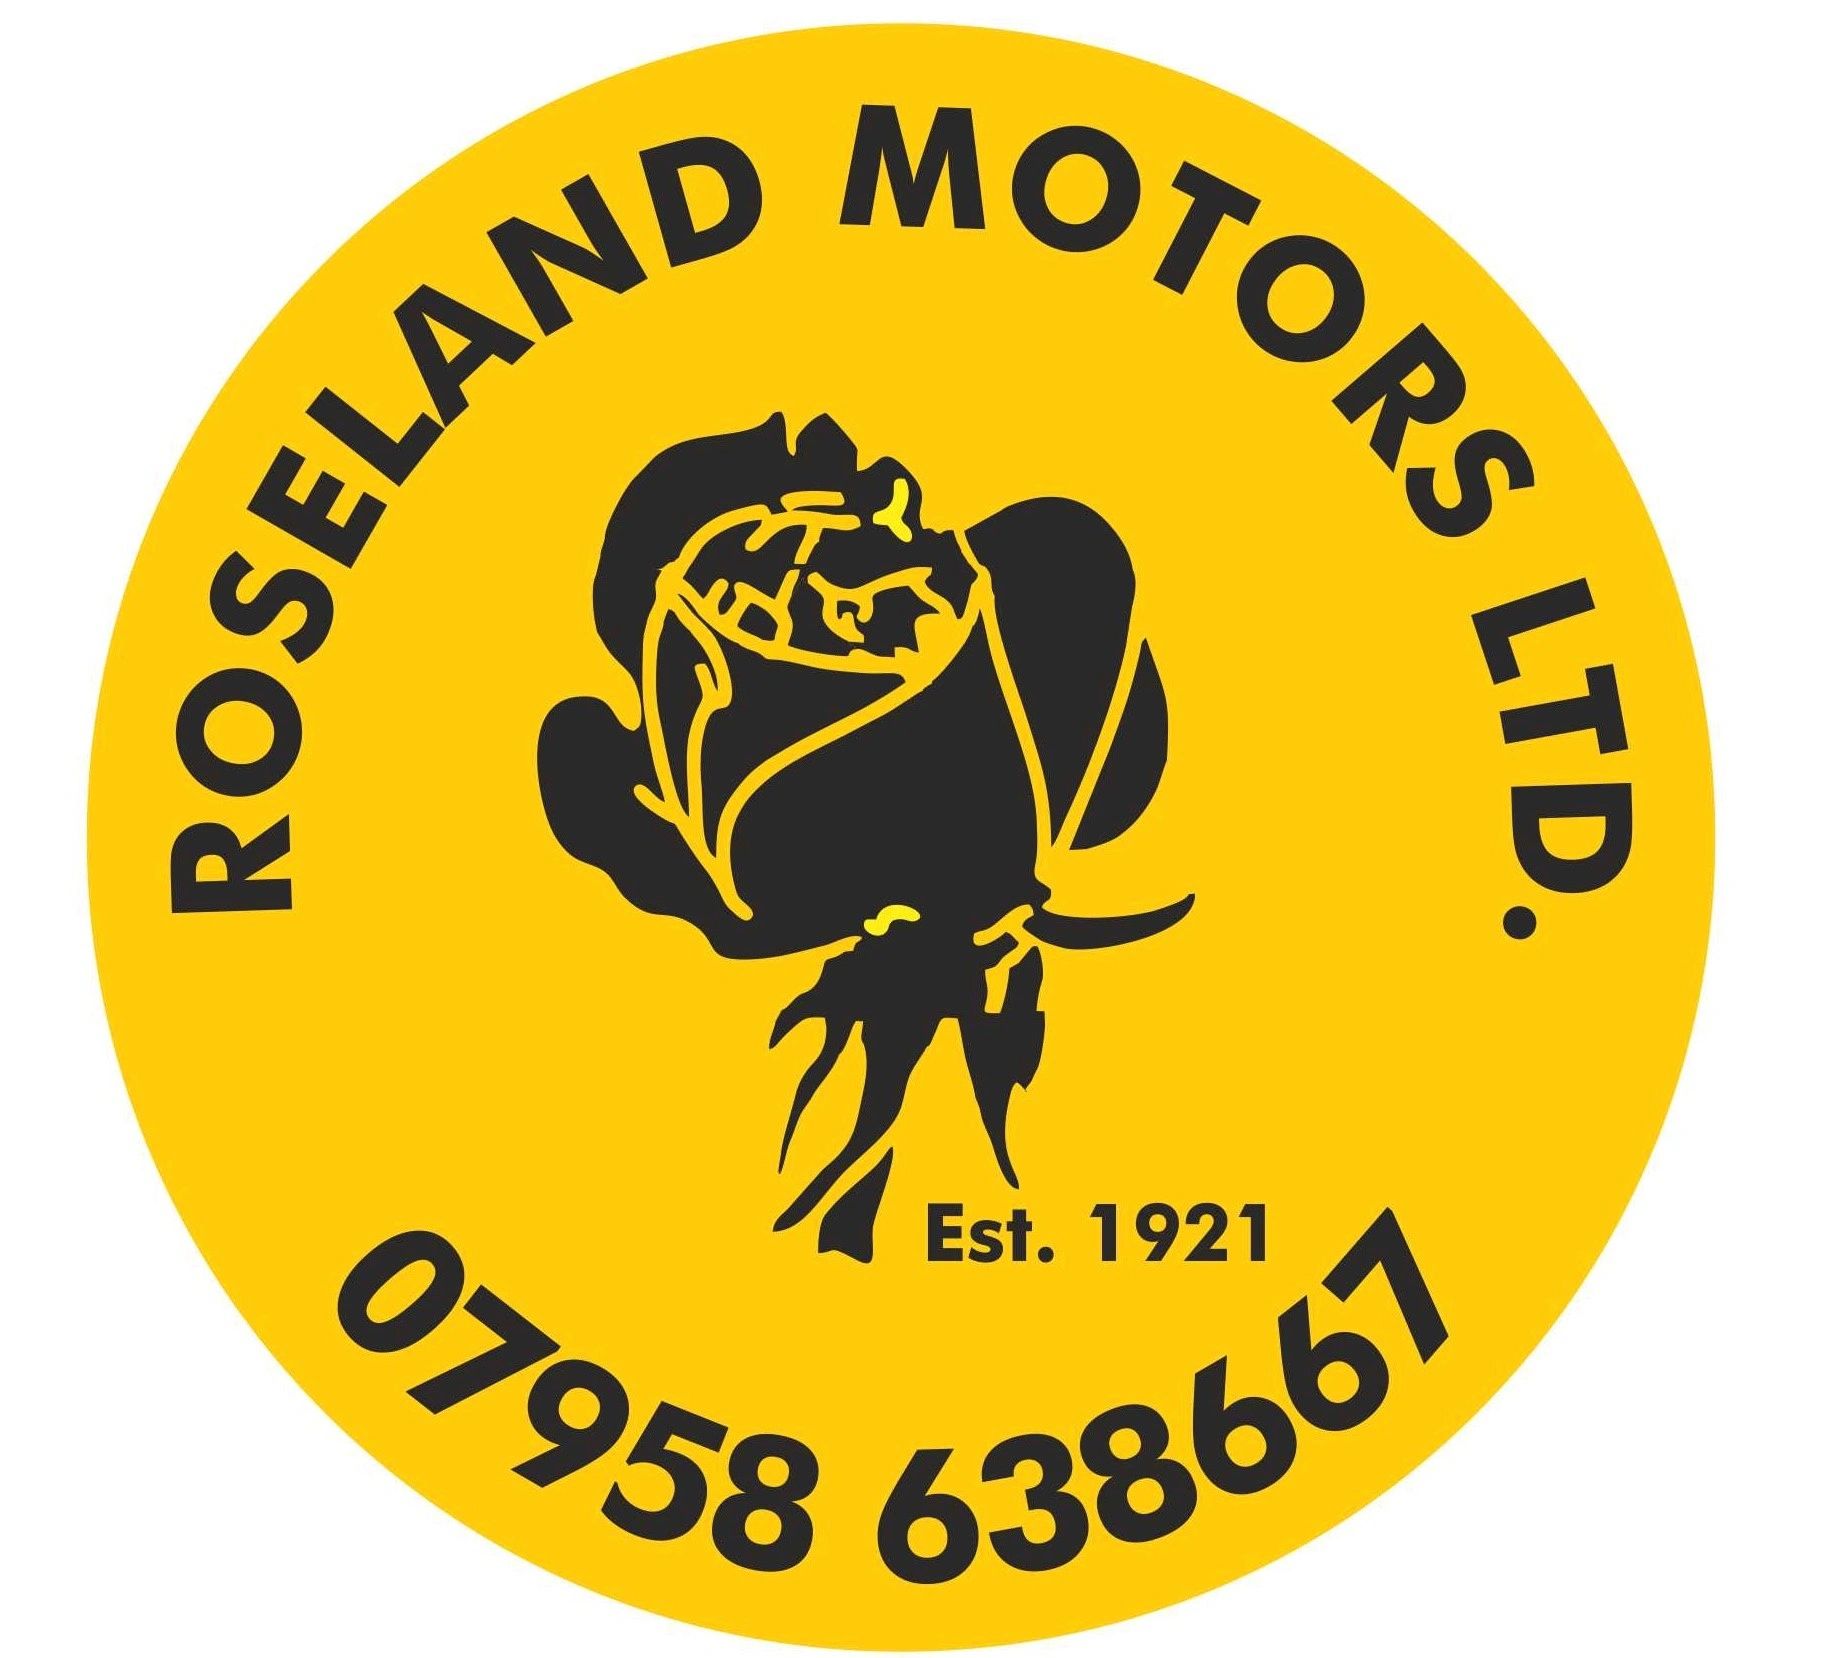 Roseland Motors logo featuring a rose and phone number.